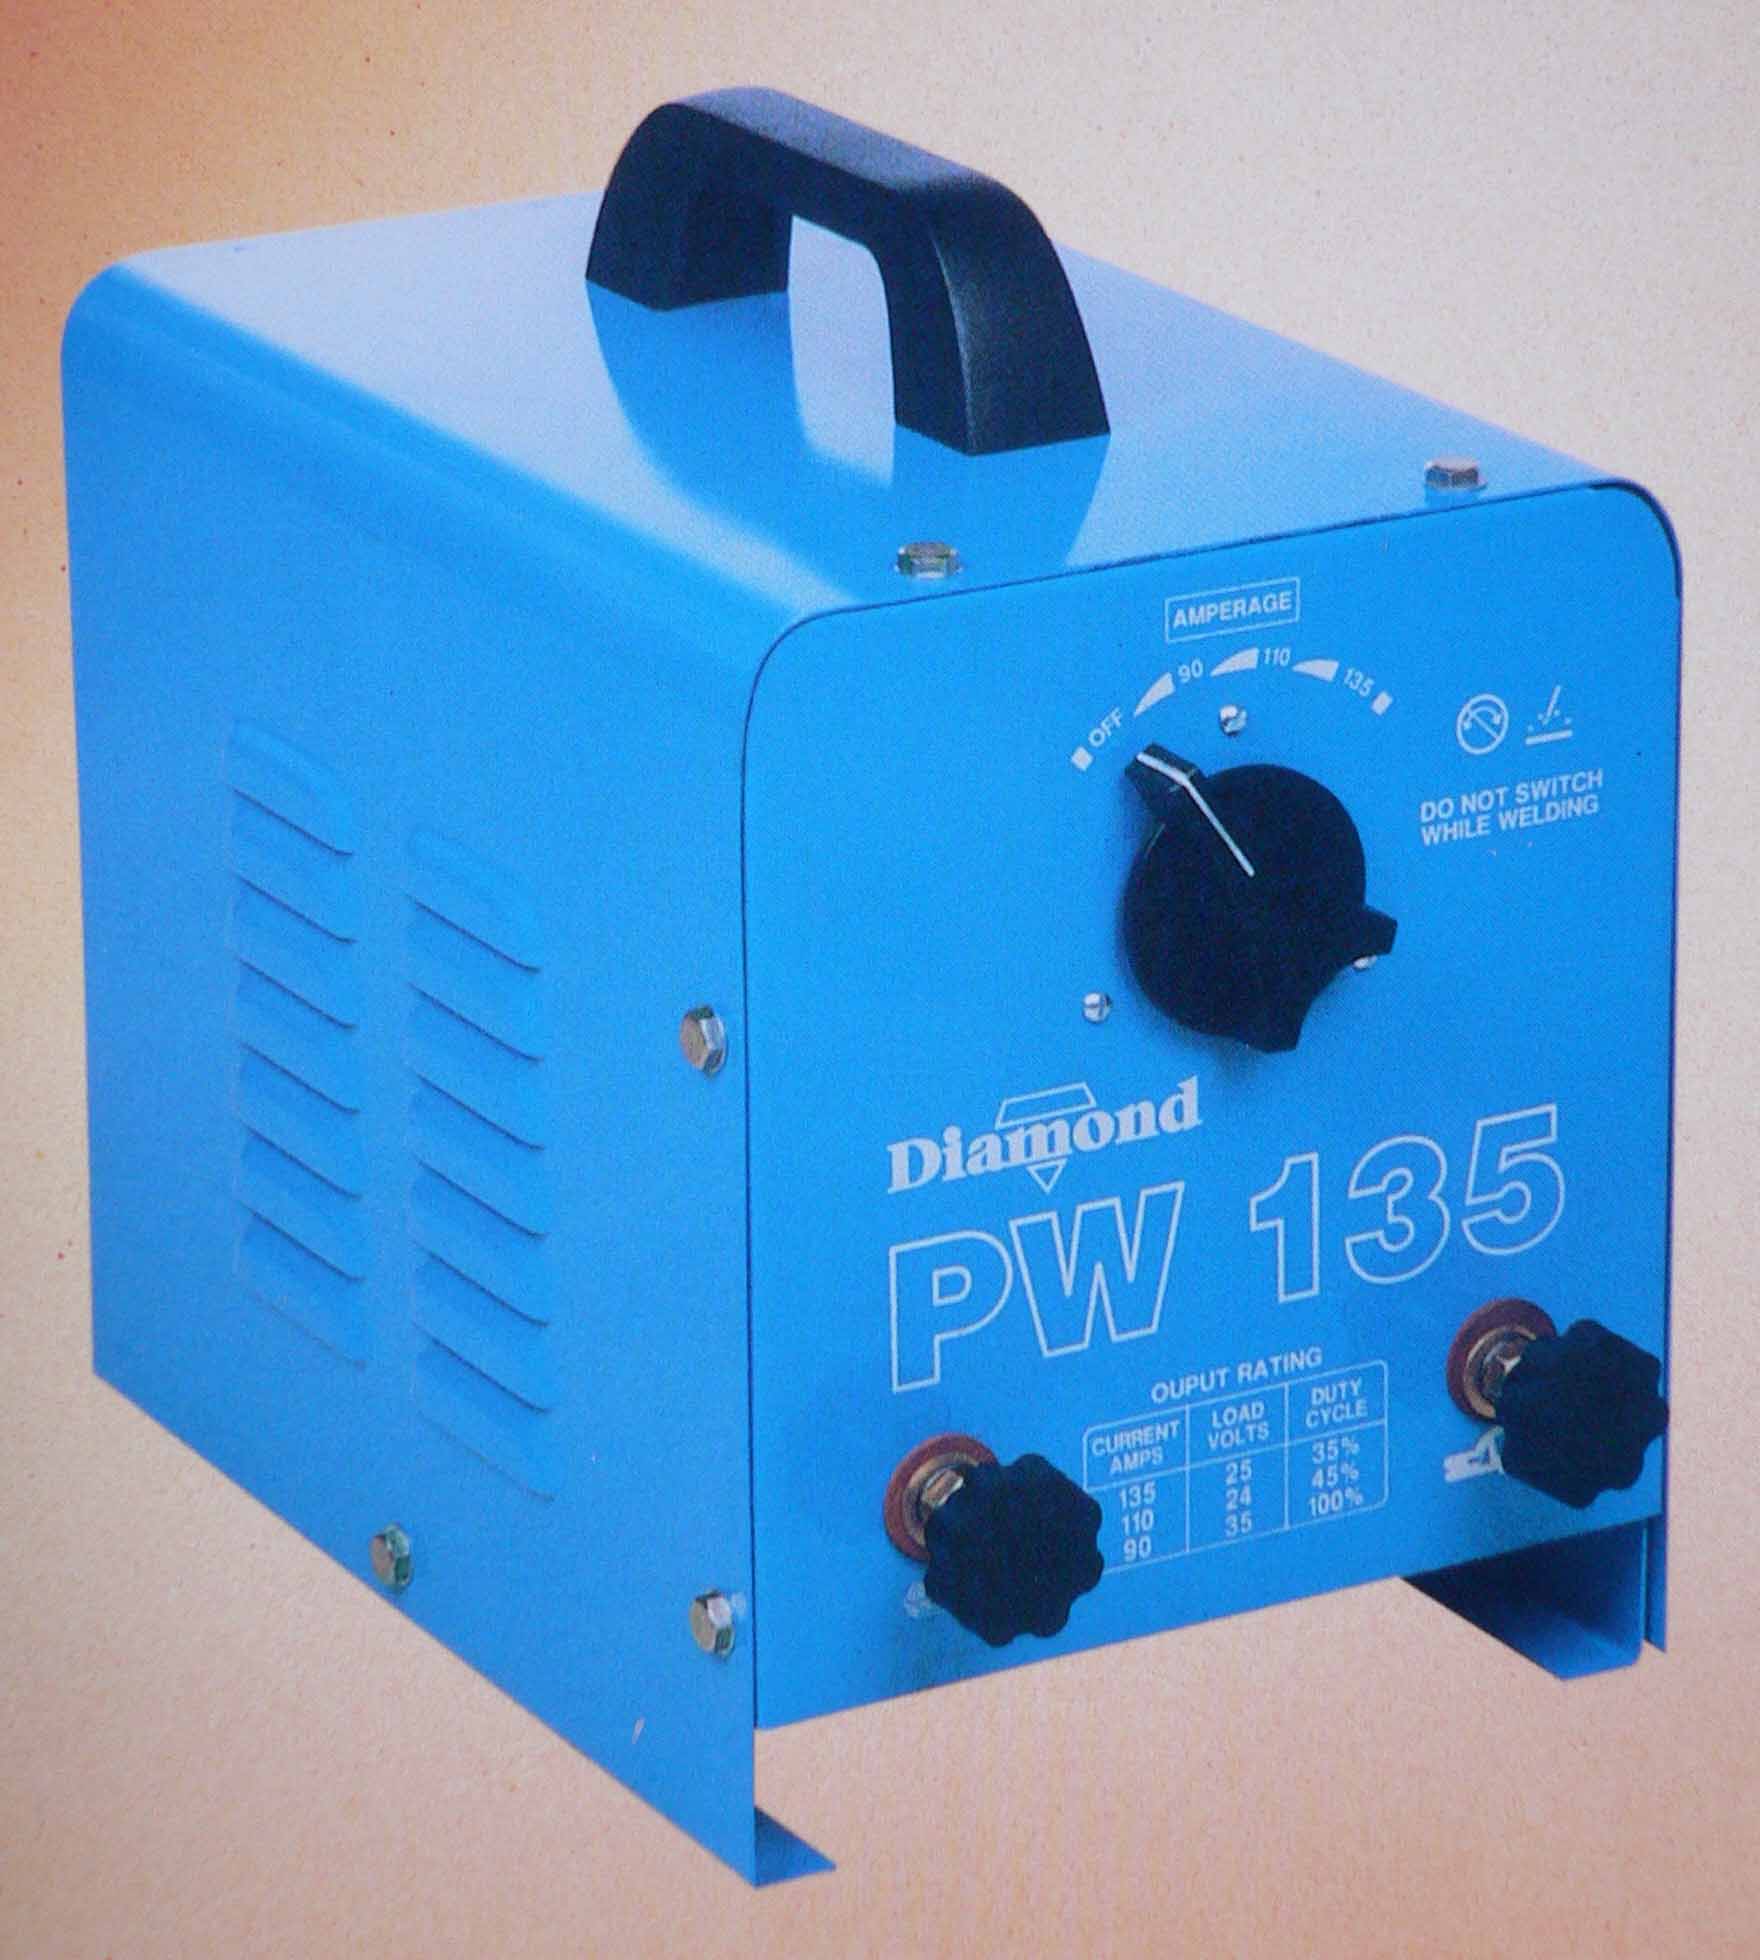 The PW 135 is a portable welding machine. It weighs 28kgs. It is also easy to carry around. It has a fan assisted cooling. 3 welding current ranges from 90A ~ 135A.